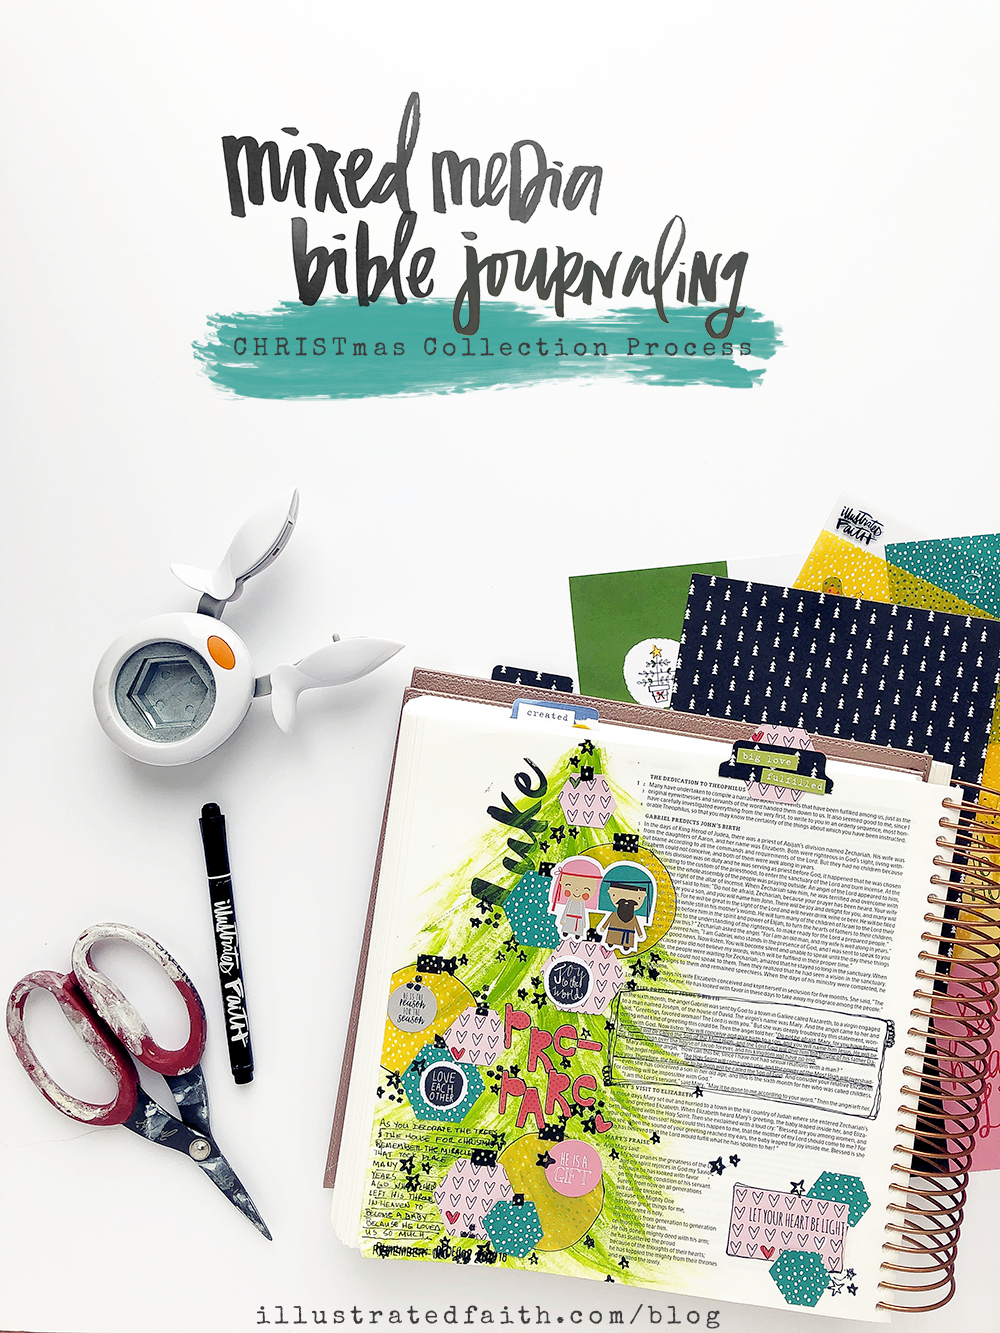 Mixed Media Bible Journaling by Heather Greenwood | using the CHRISTmas Collection | Scrapbook Paper Layering Process and stamping